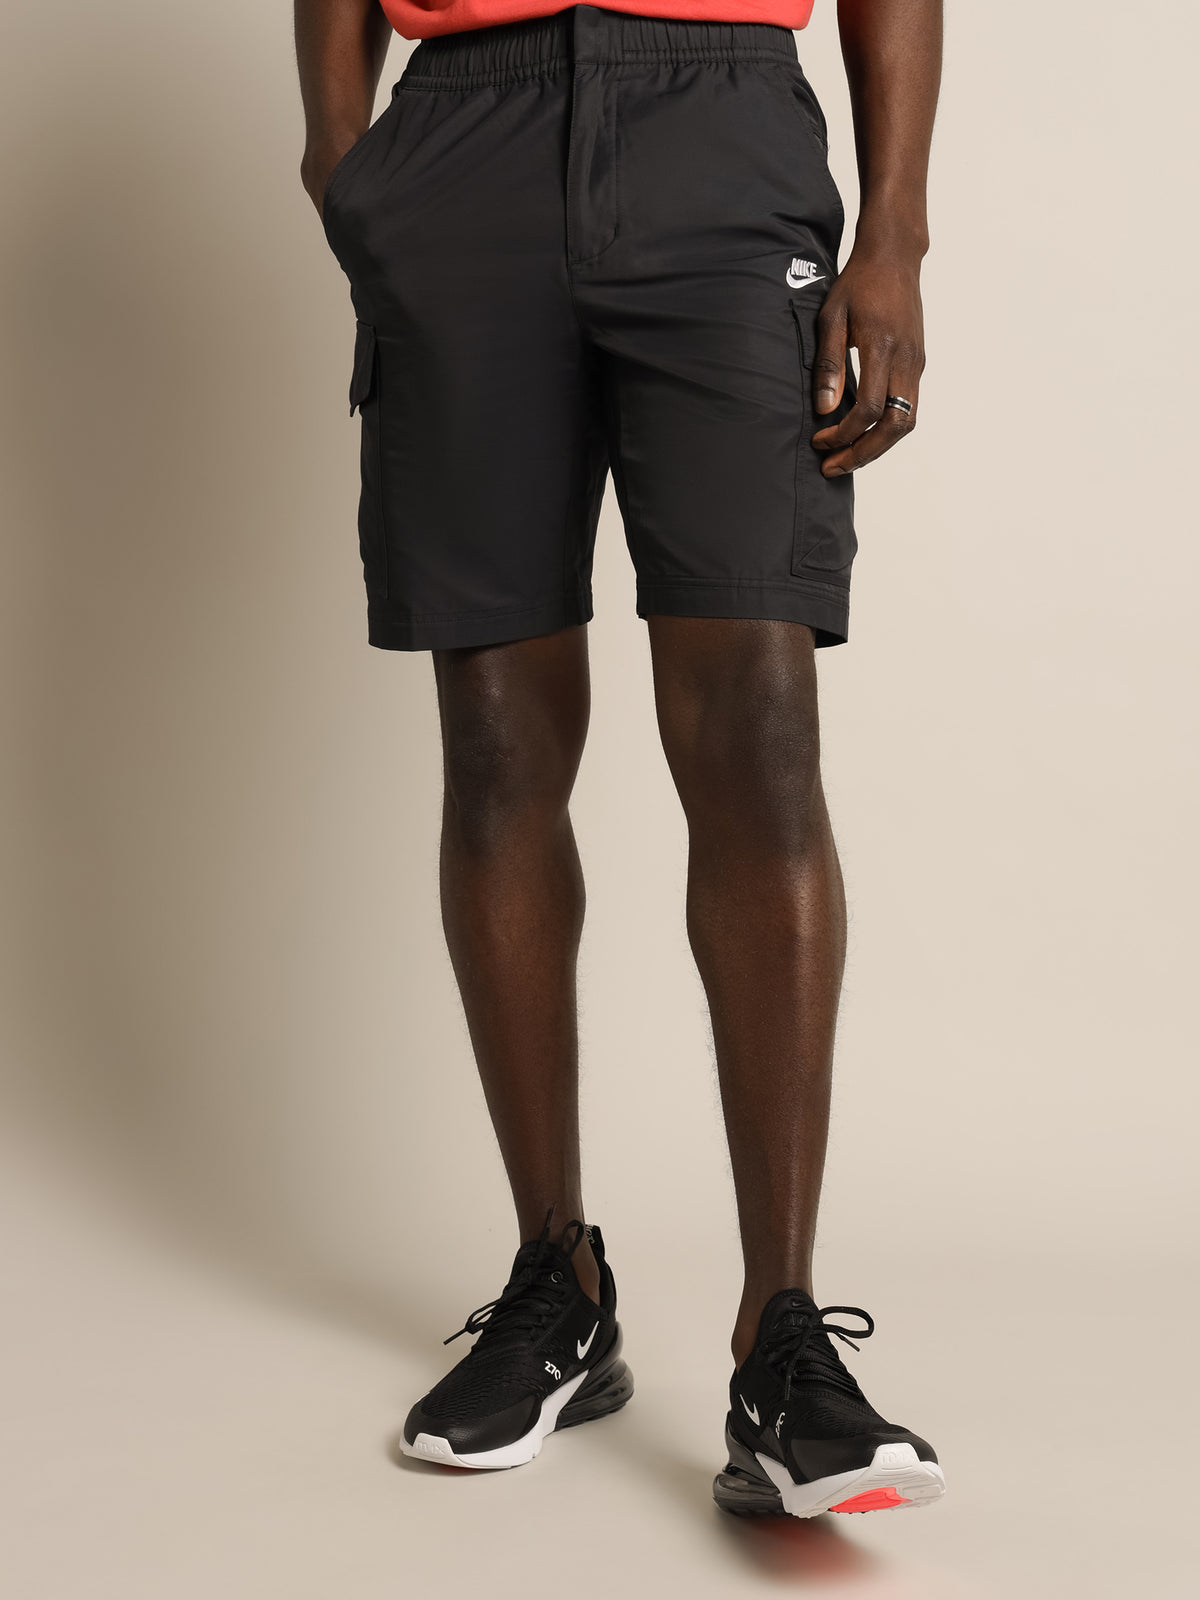 NSW Woven Utility Shorts in Black